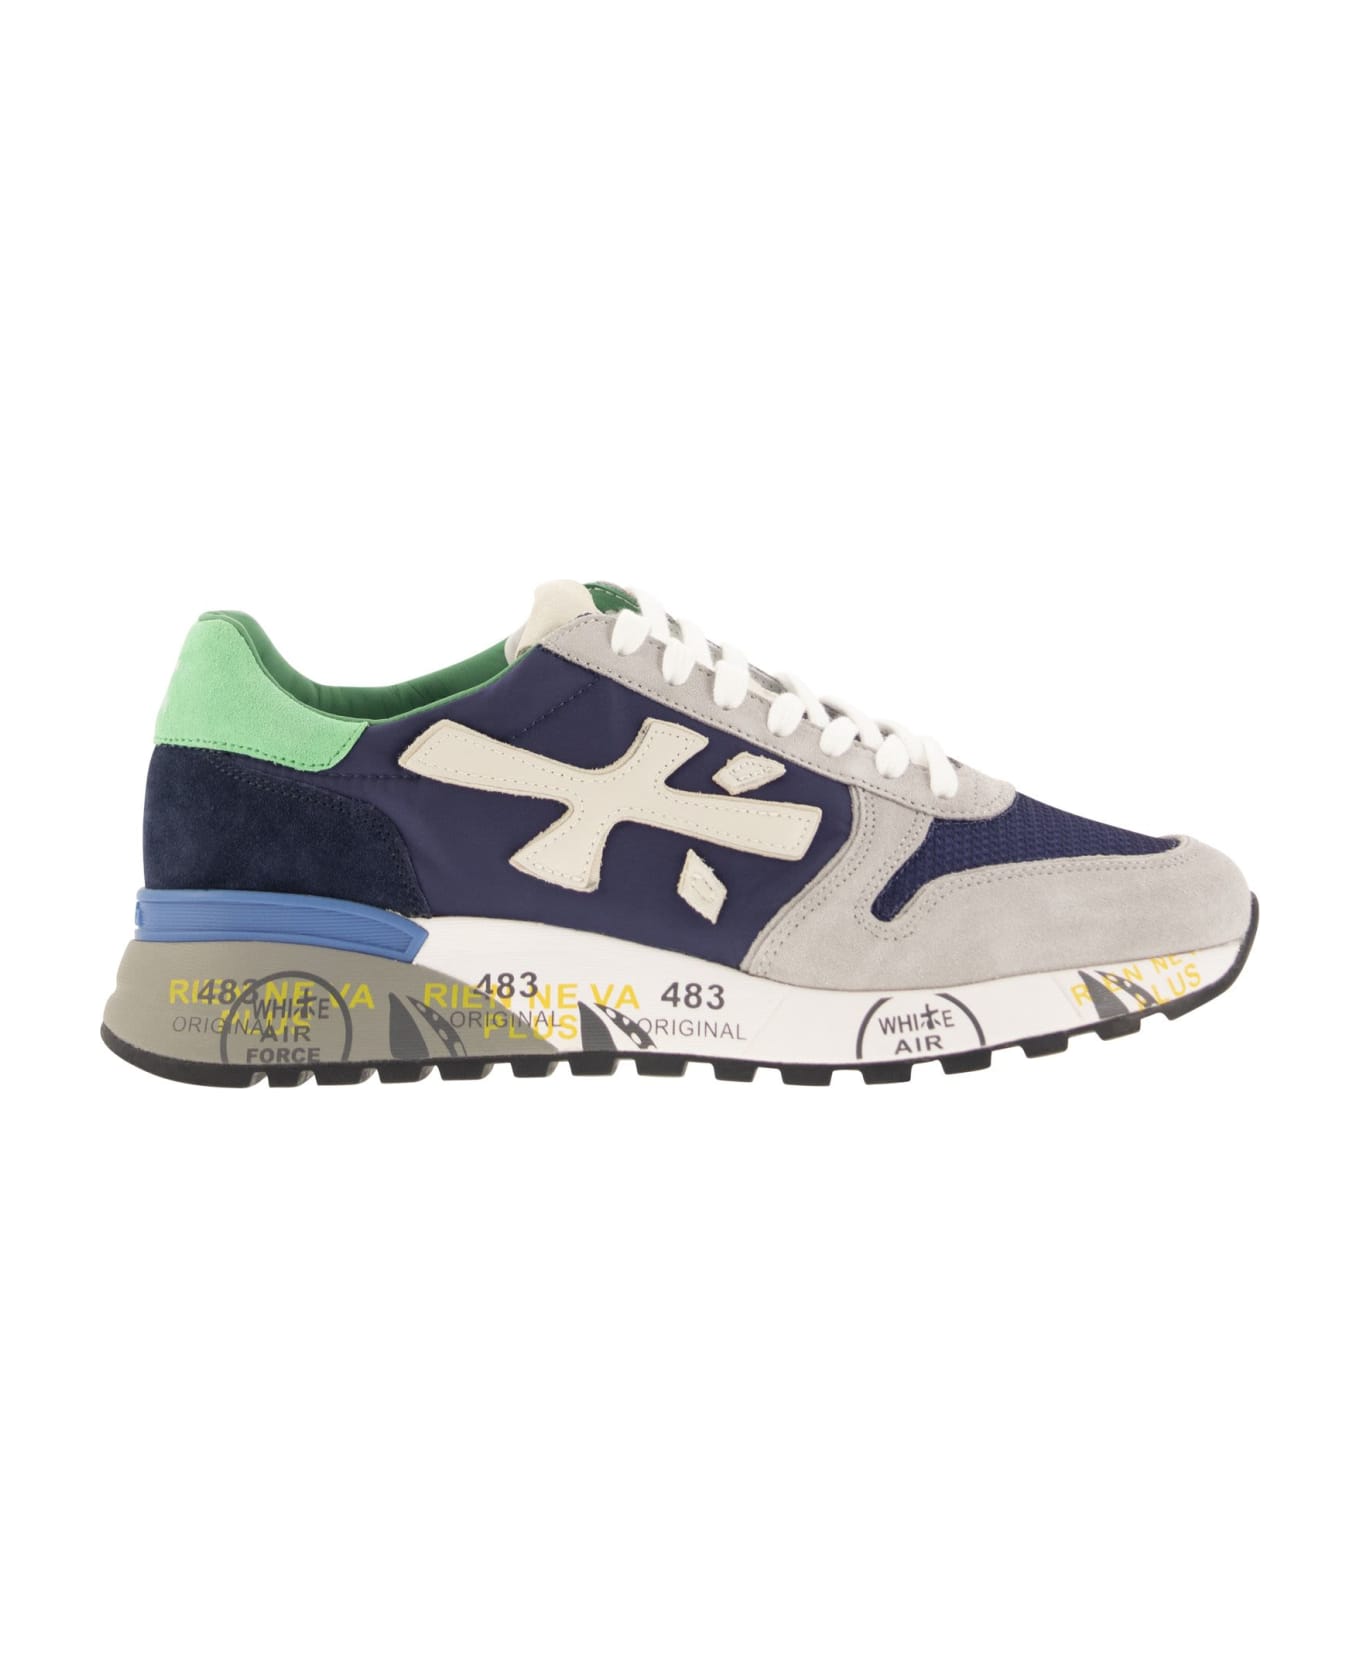 Premiata Mick Sneakers In Blue Suede And Fabric - Blue/green/grey